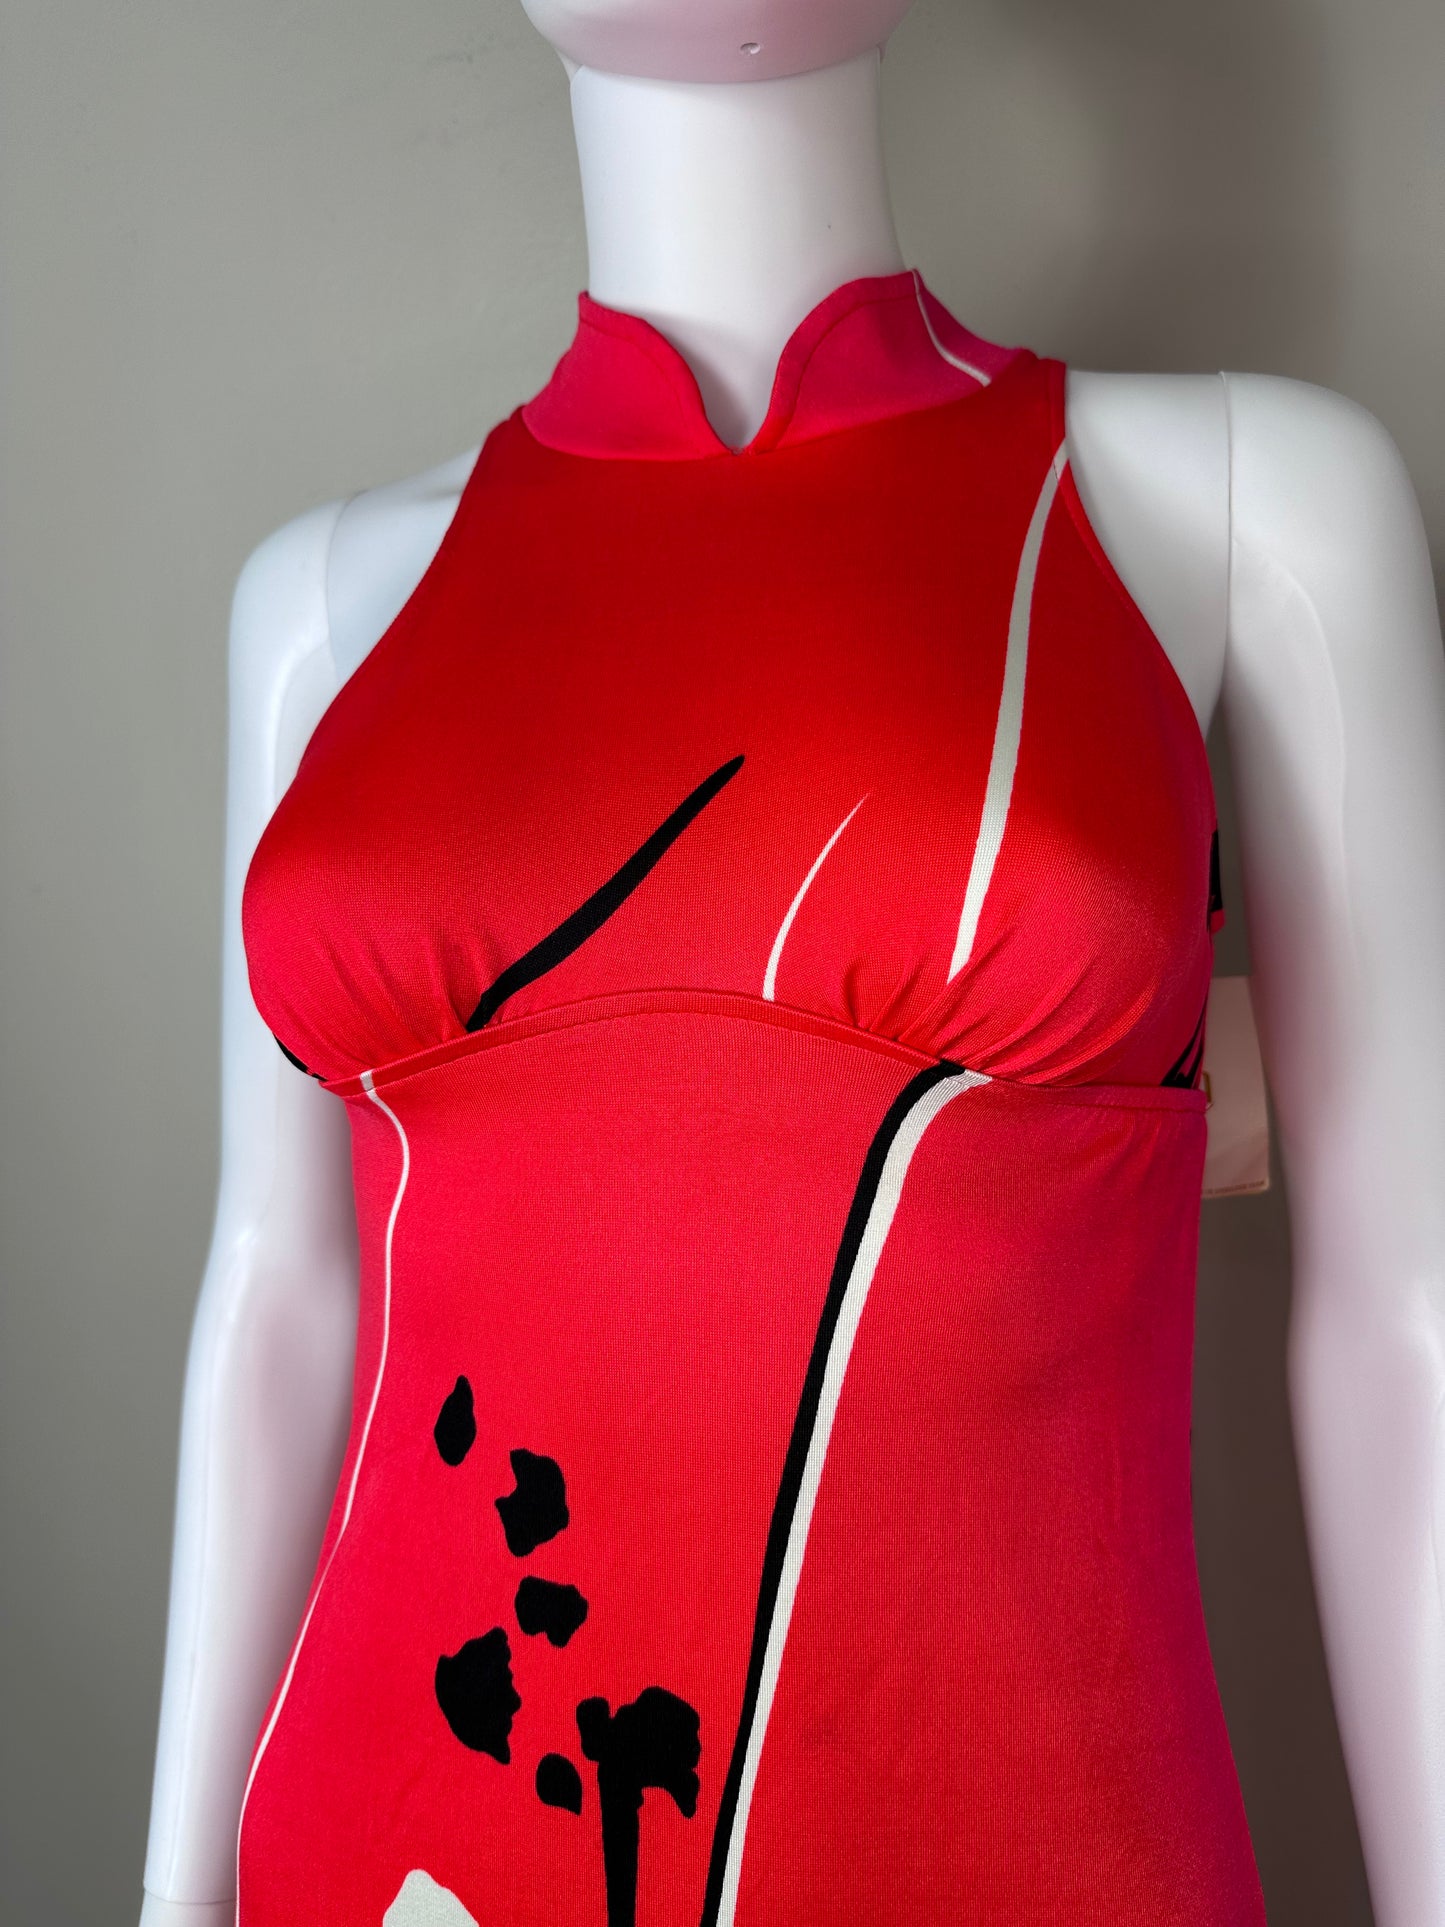 1960s/70s Red Jantzen Swim Dress, Size X-Small, Deadstock with Tags